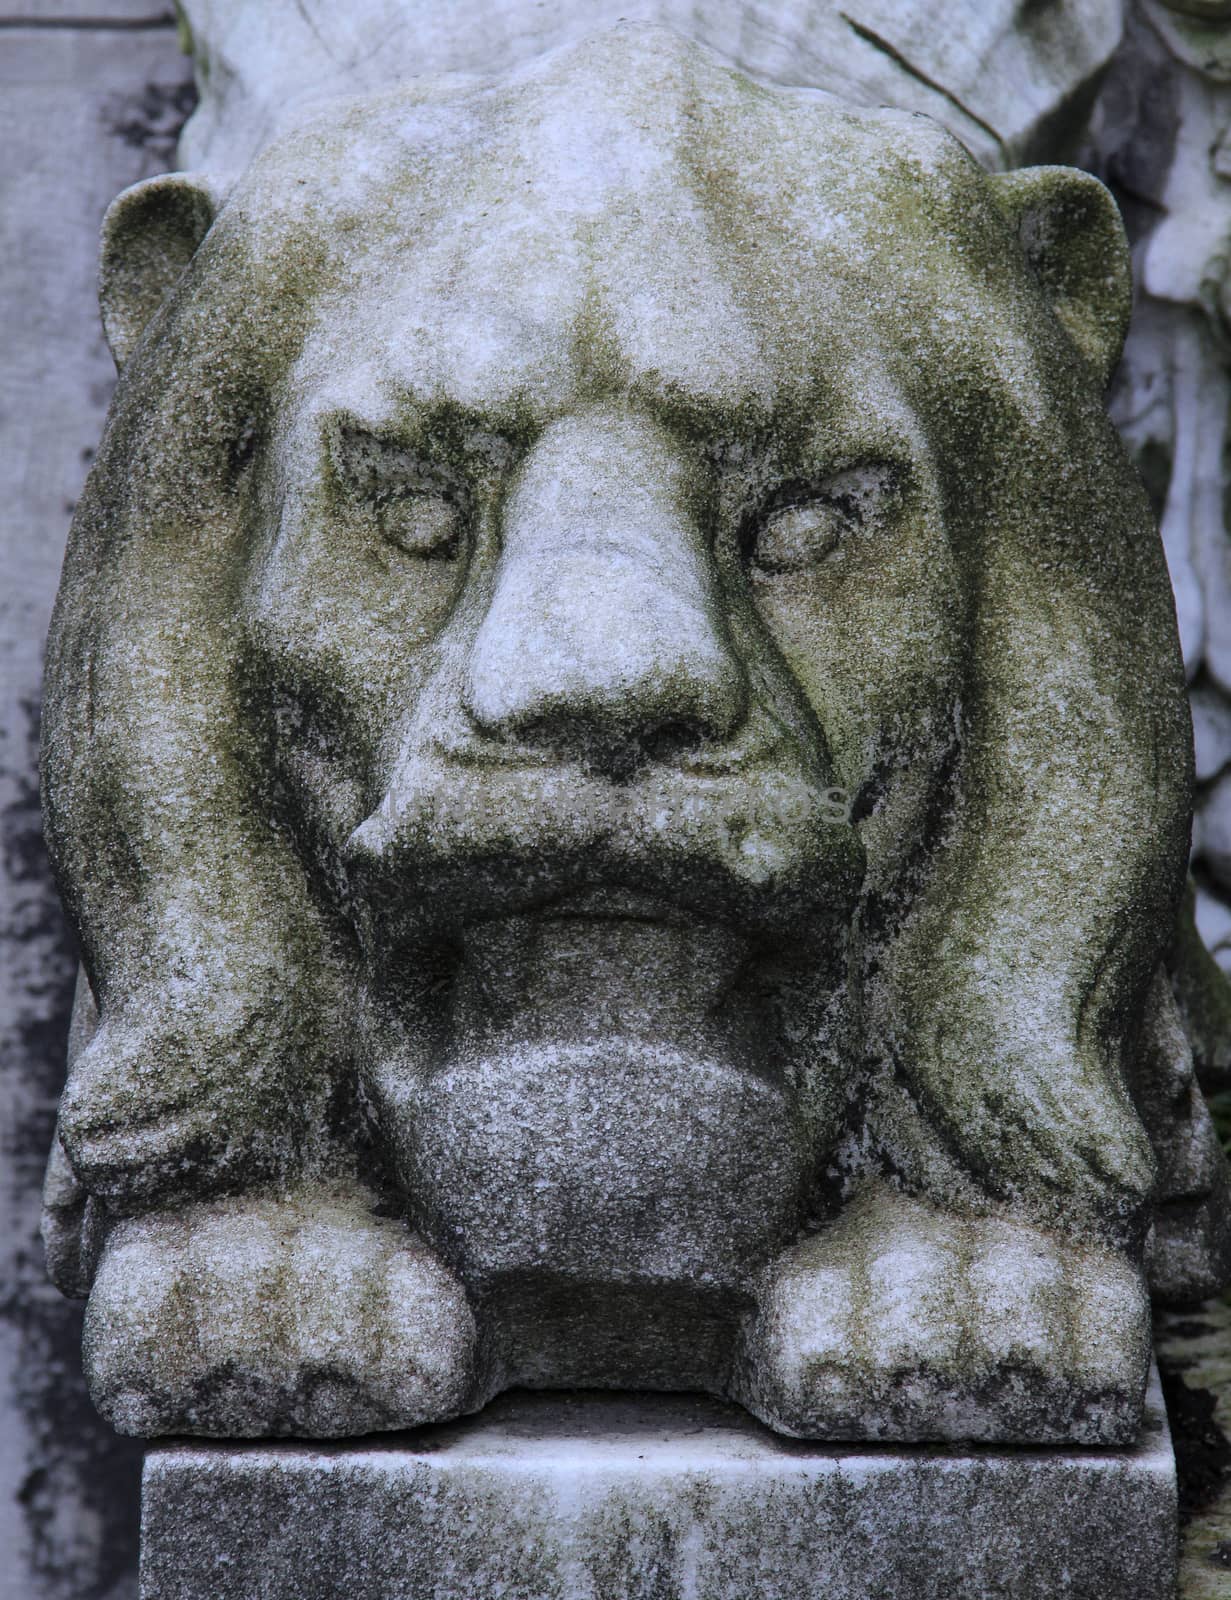 Eroded cemetery tombstone lion statue.